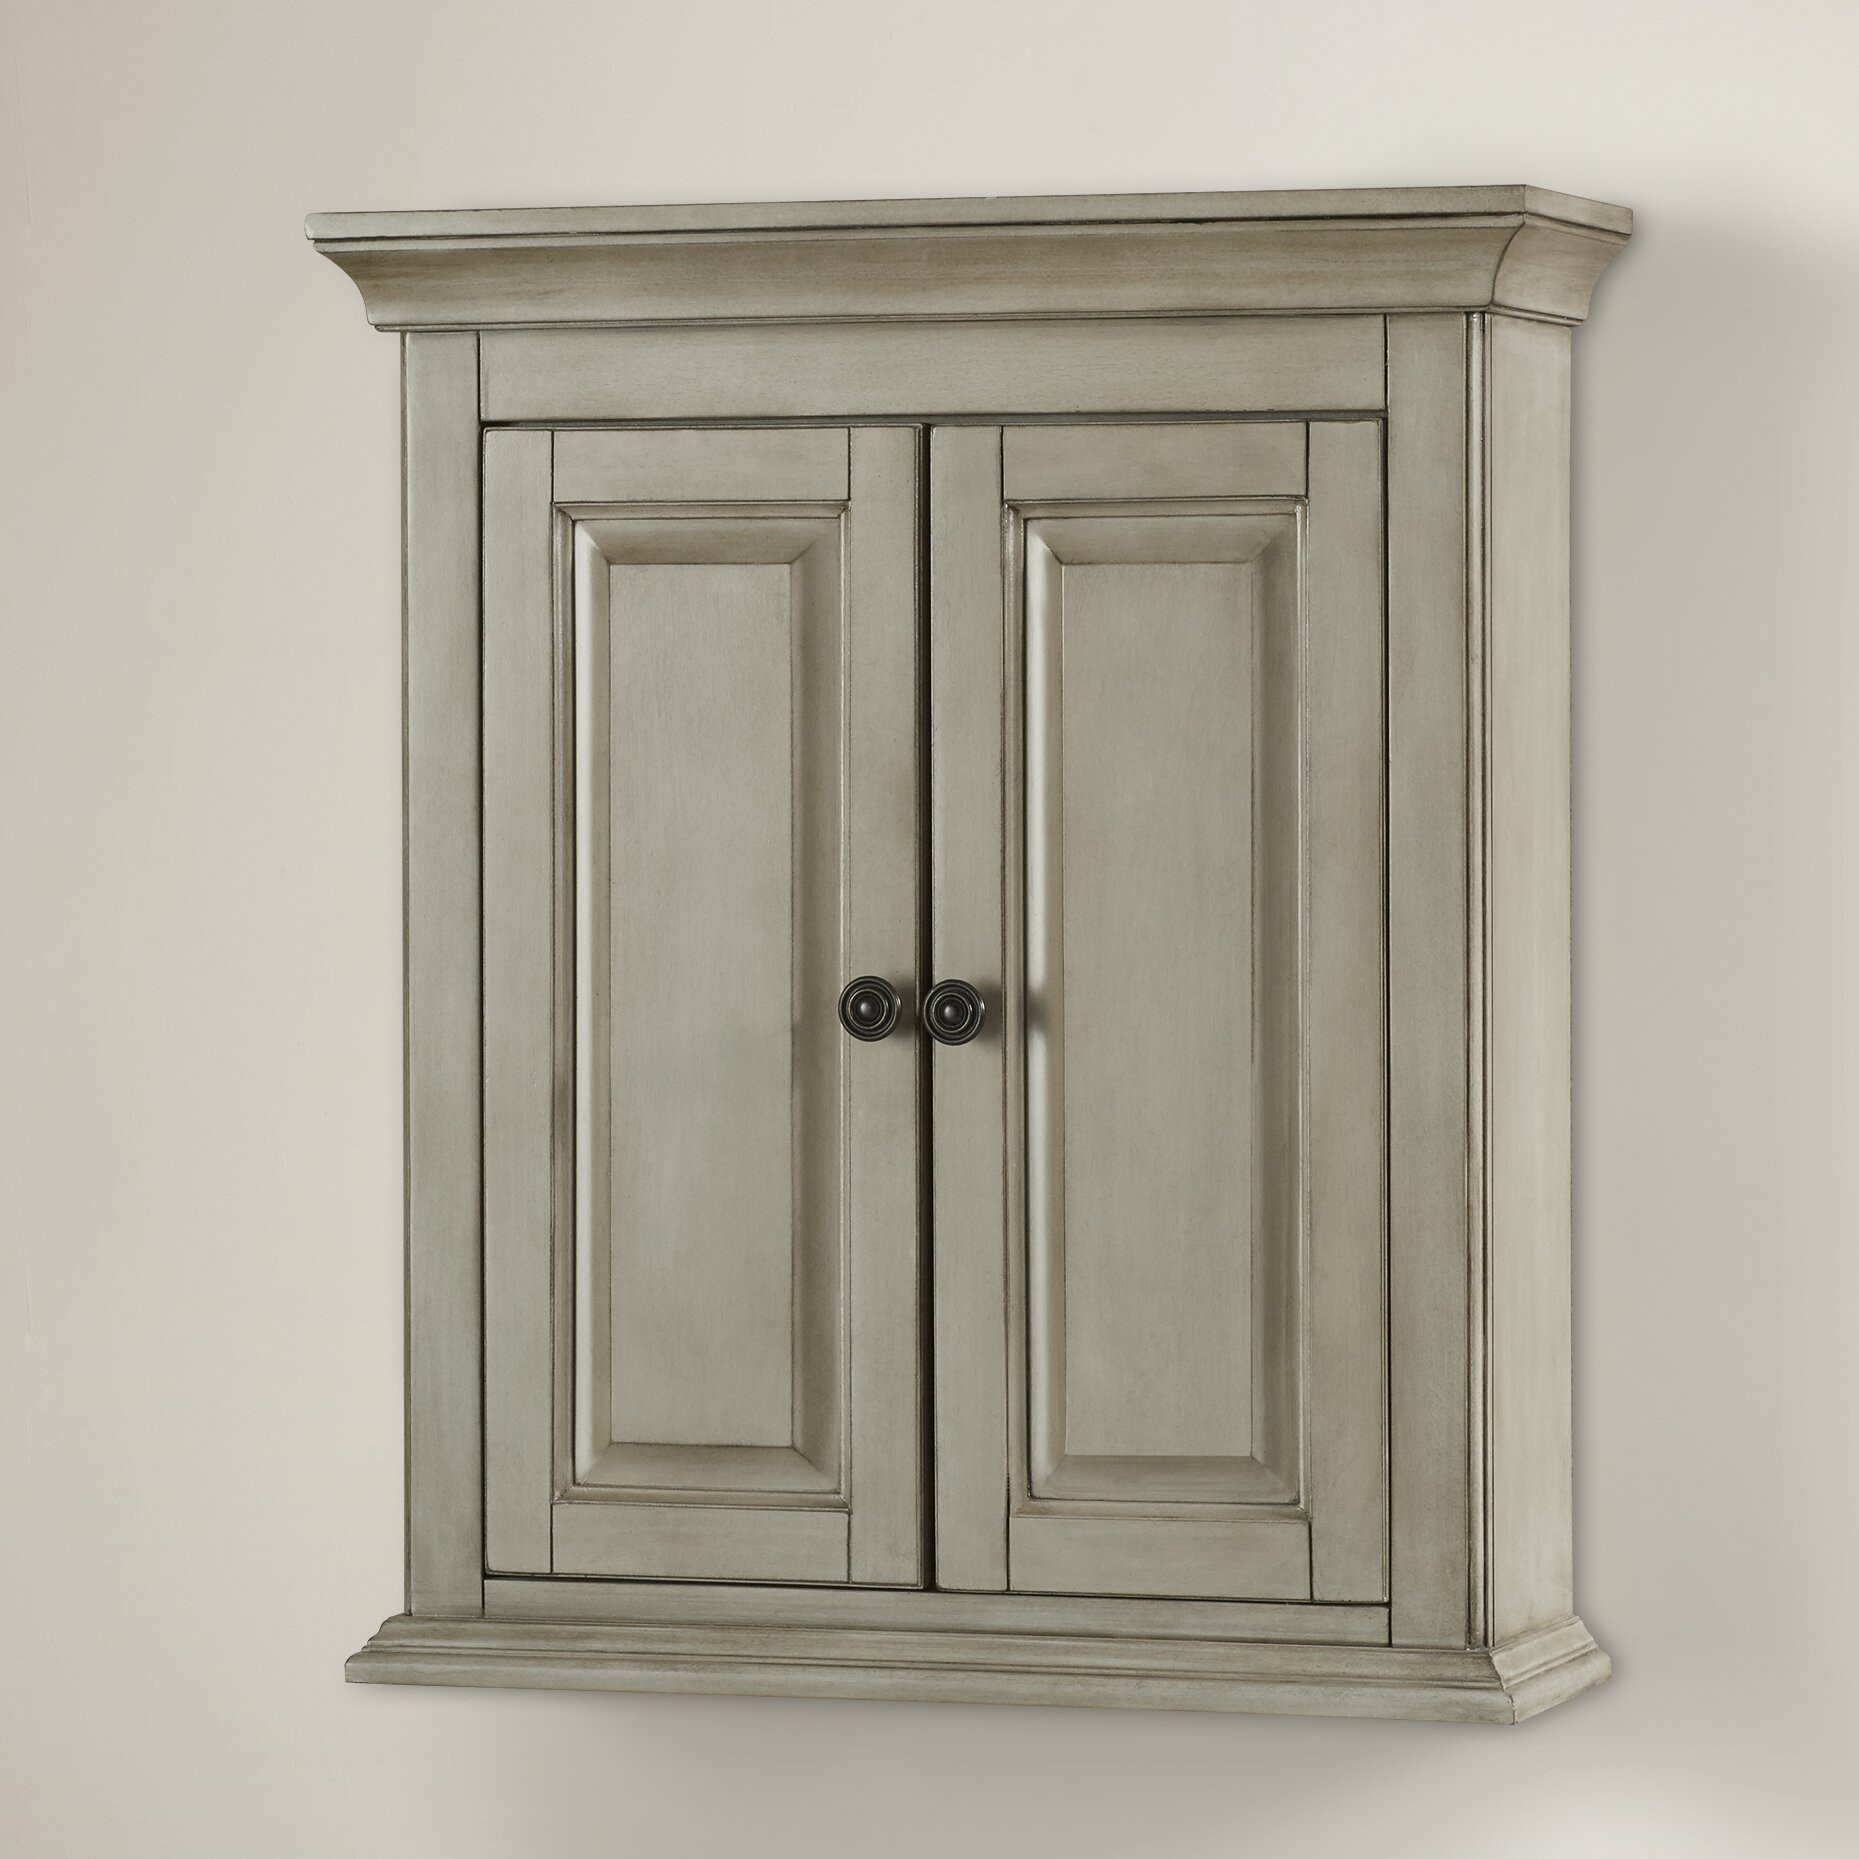 Wall Mounted Bathroom Cabinets
 Hazelwood Home Palmo 24" W x 28" H Wall Mounted Cabinet